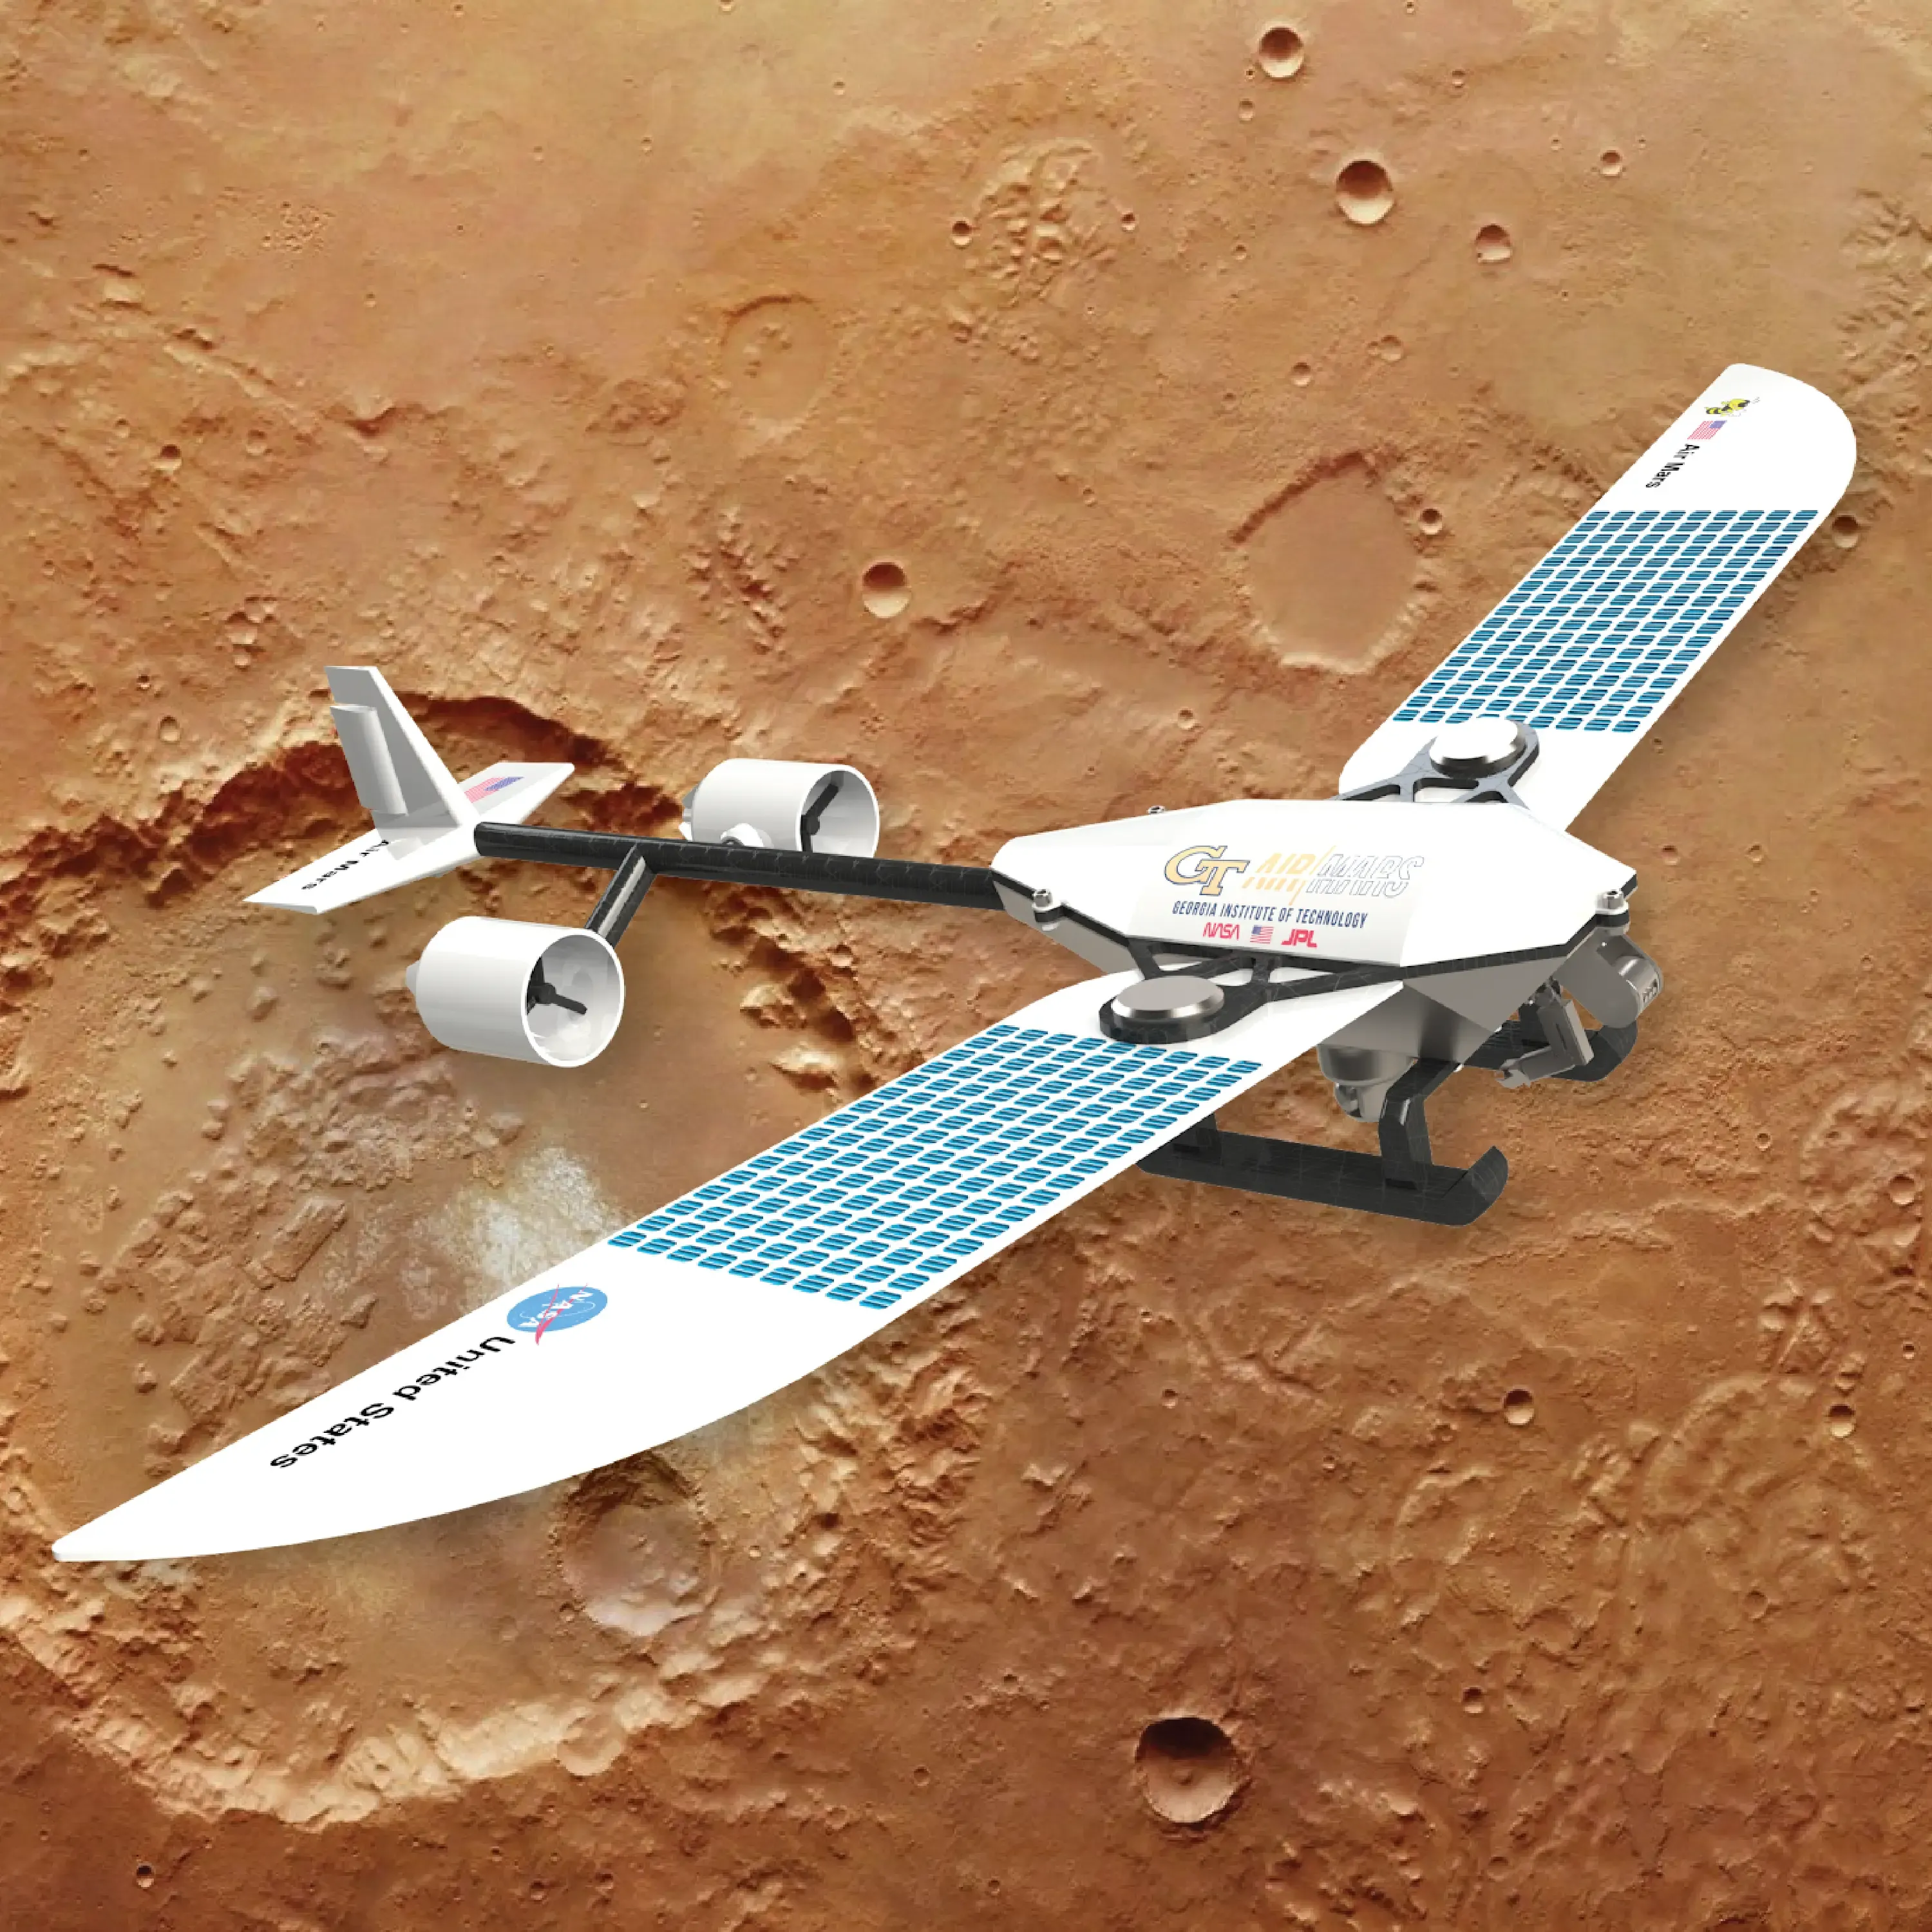 A picture of a fixed wing drone on Mars.